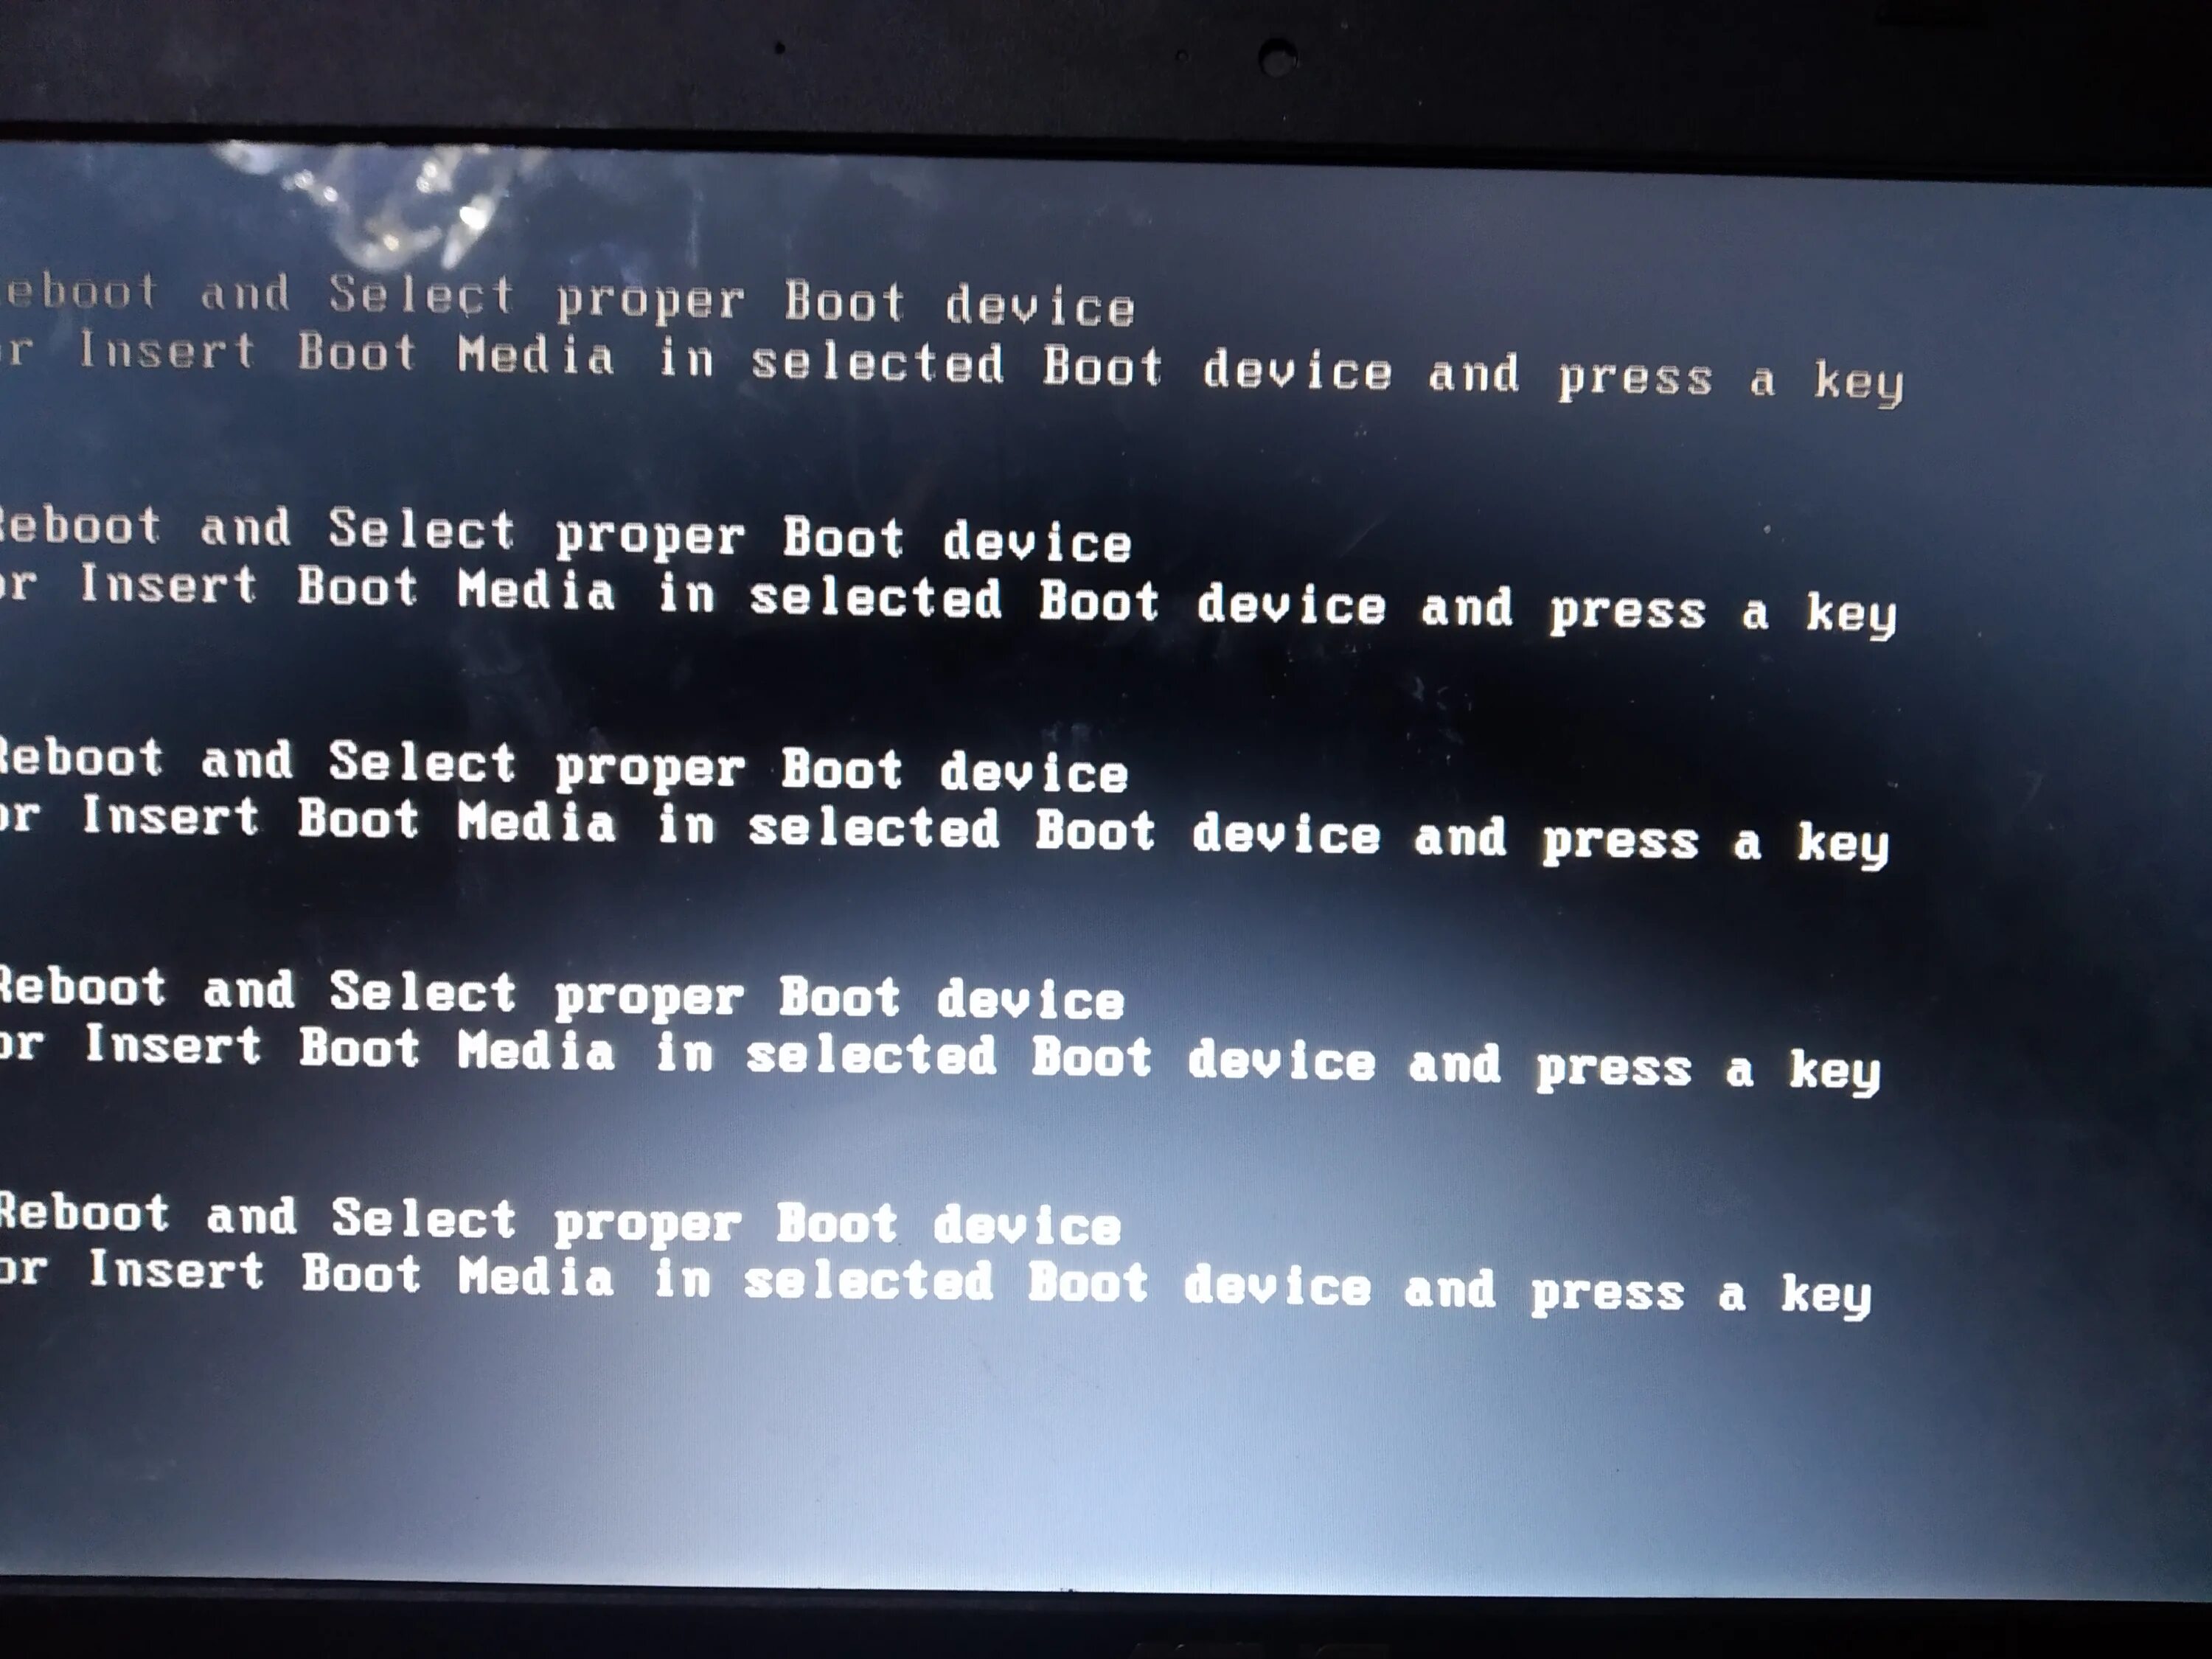 Reboot and select proper Boot device and Press a Key. Компьютер Reboot and select proper Boot device. Reboot and select proper Boot device на ноутбуке. Ошибка Reboot and select proper Boot device. Ошибка boot and select proper boot device